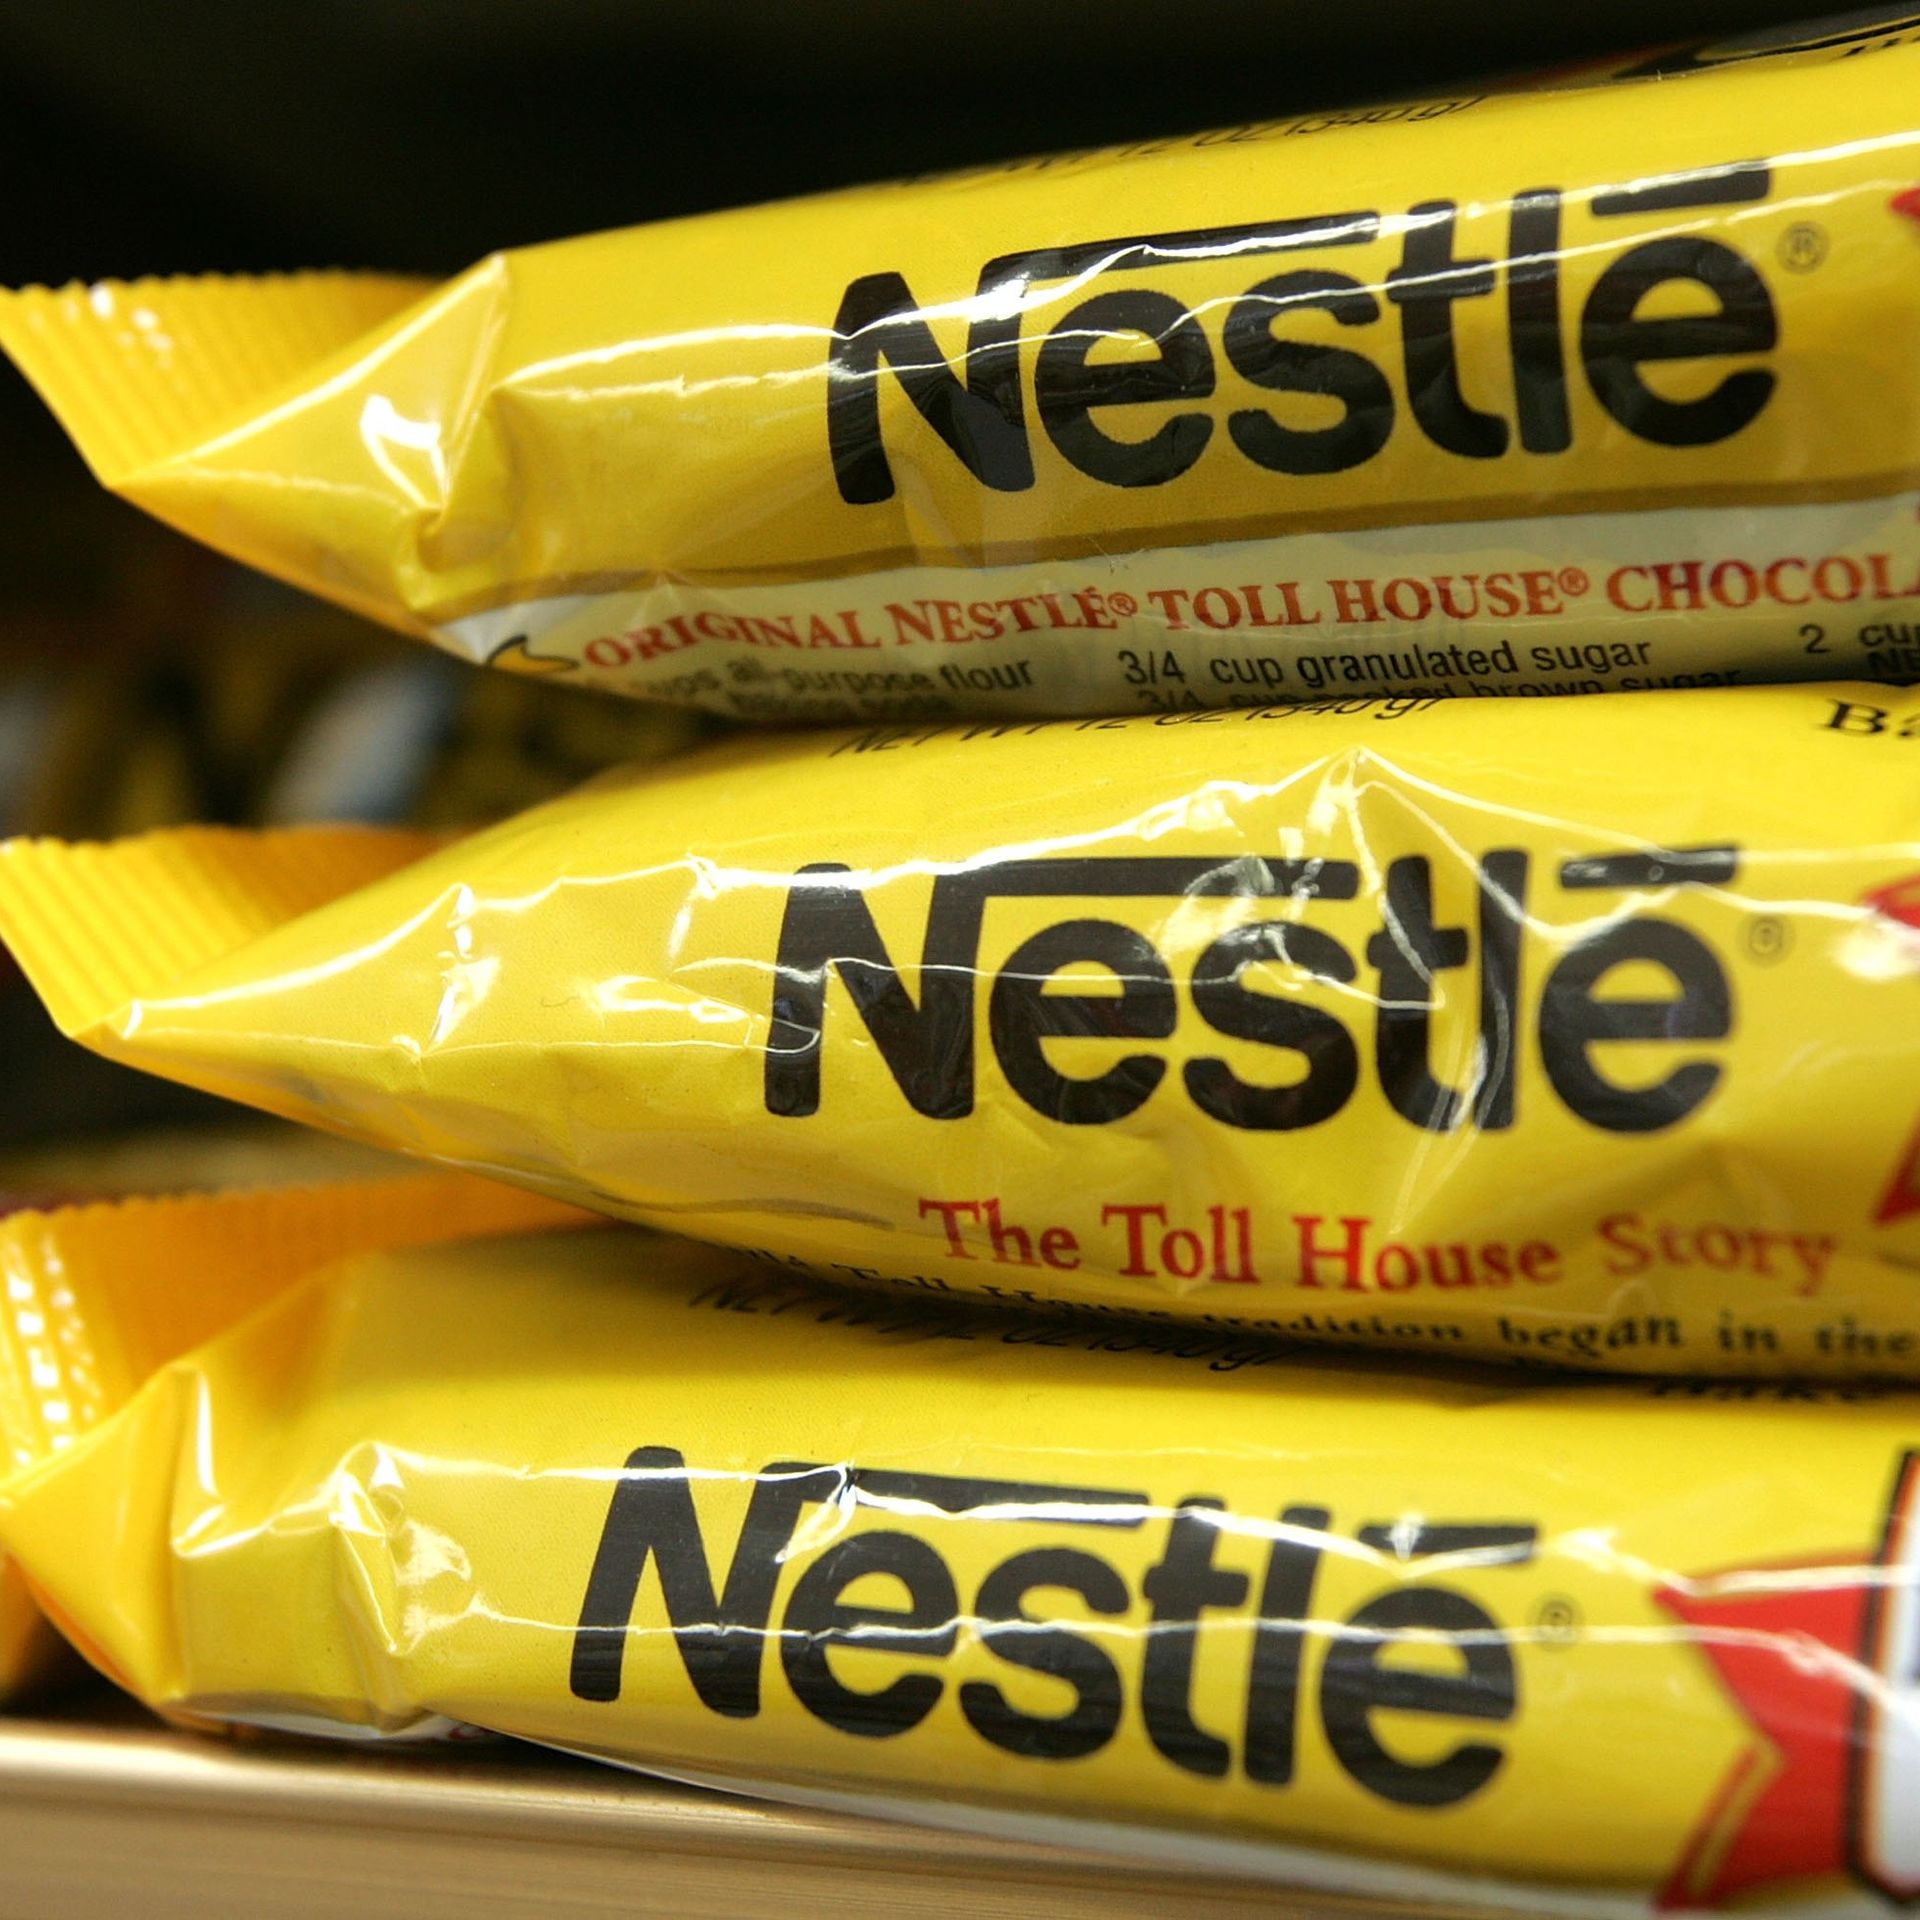 Scooplet: Nestlé to debut plant-based chocolate chips